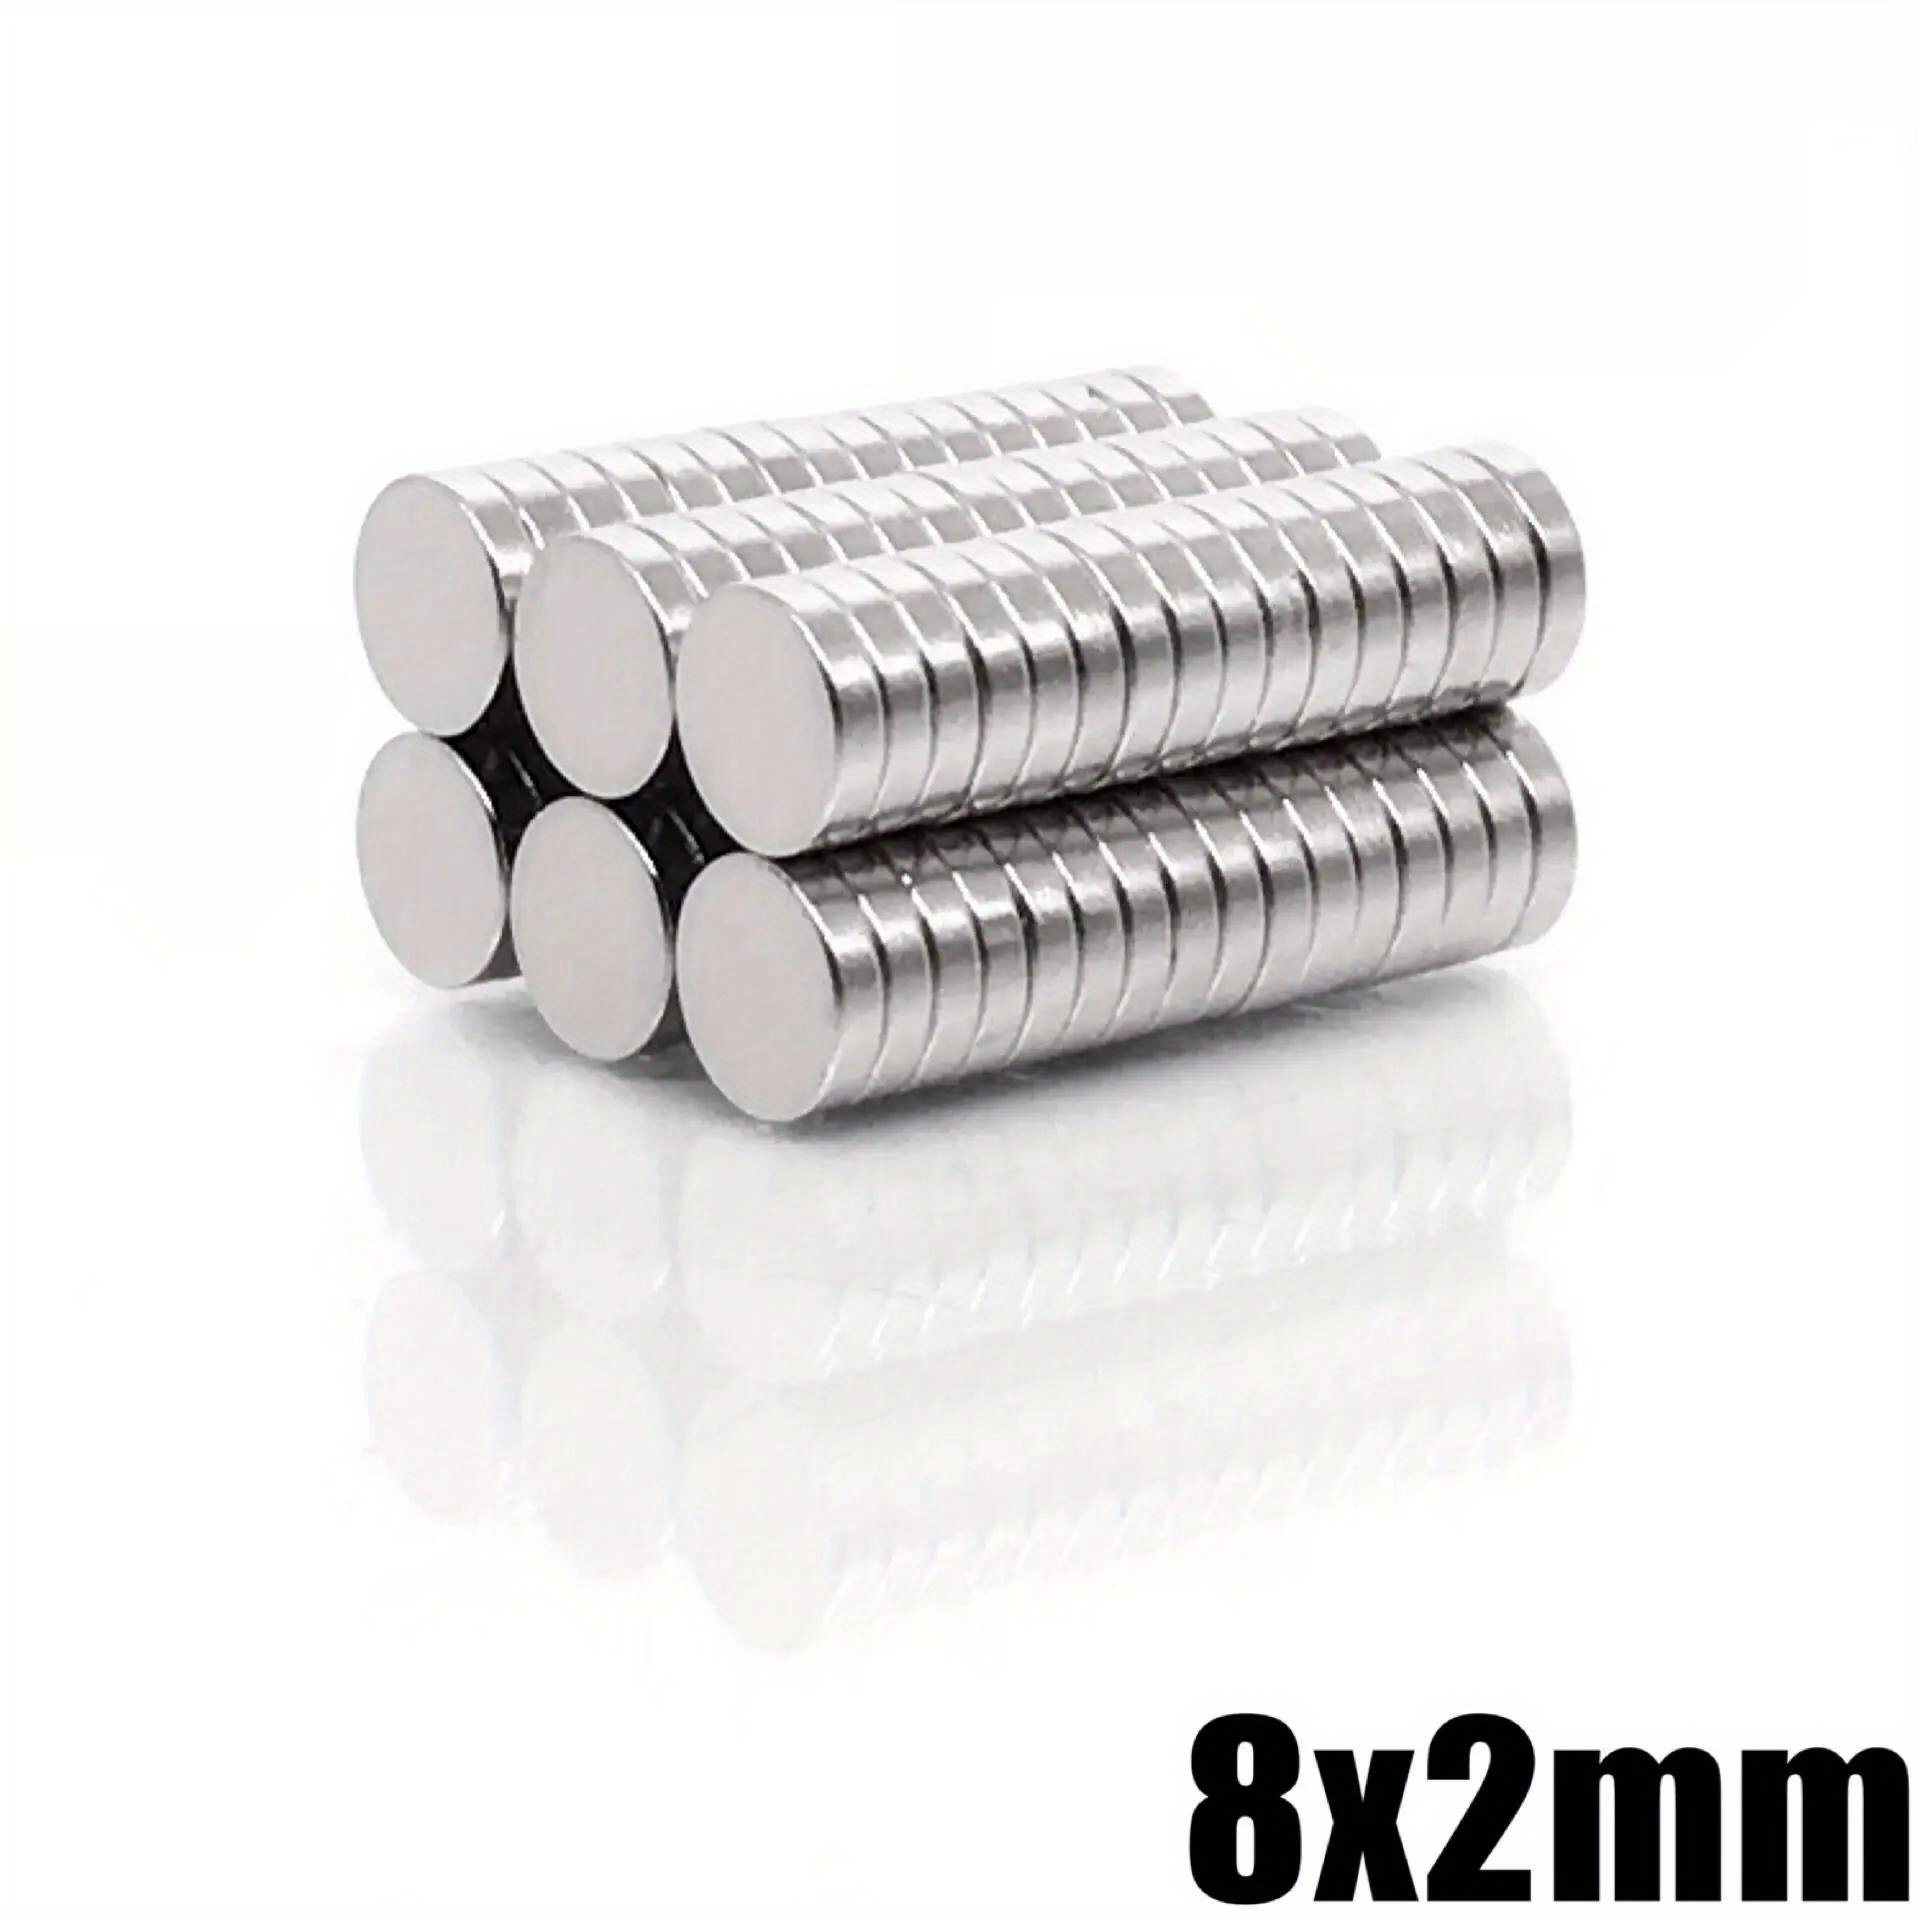 

200/500pcs 8x2 Mm N35 Neodymium Super Strong Magnet 8mmx2mm Permanent Round Magnet 8x2mm Powerful Magnetic Disc Magnet 8*2mm